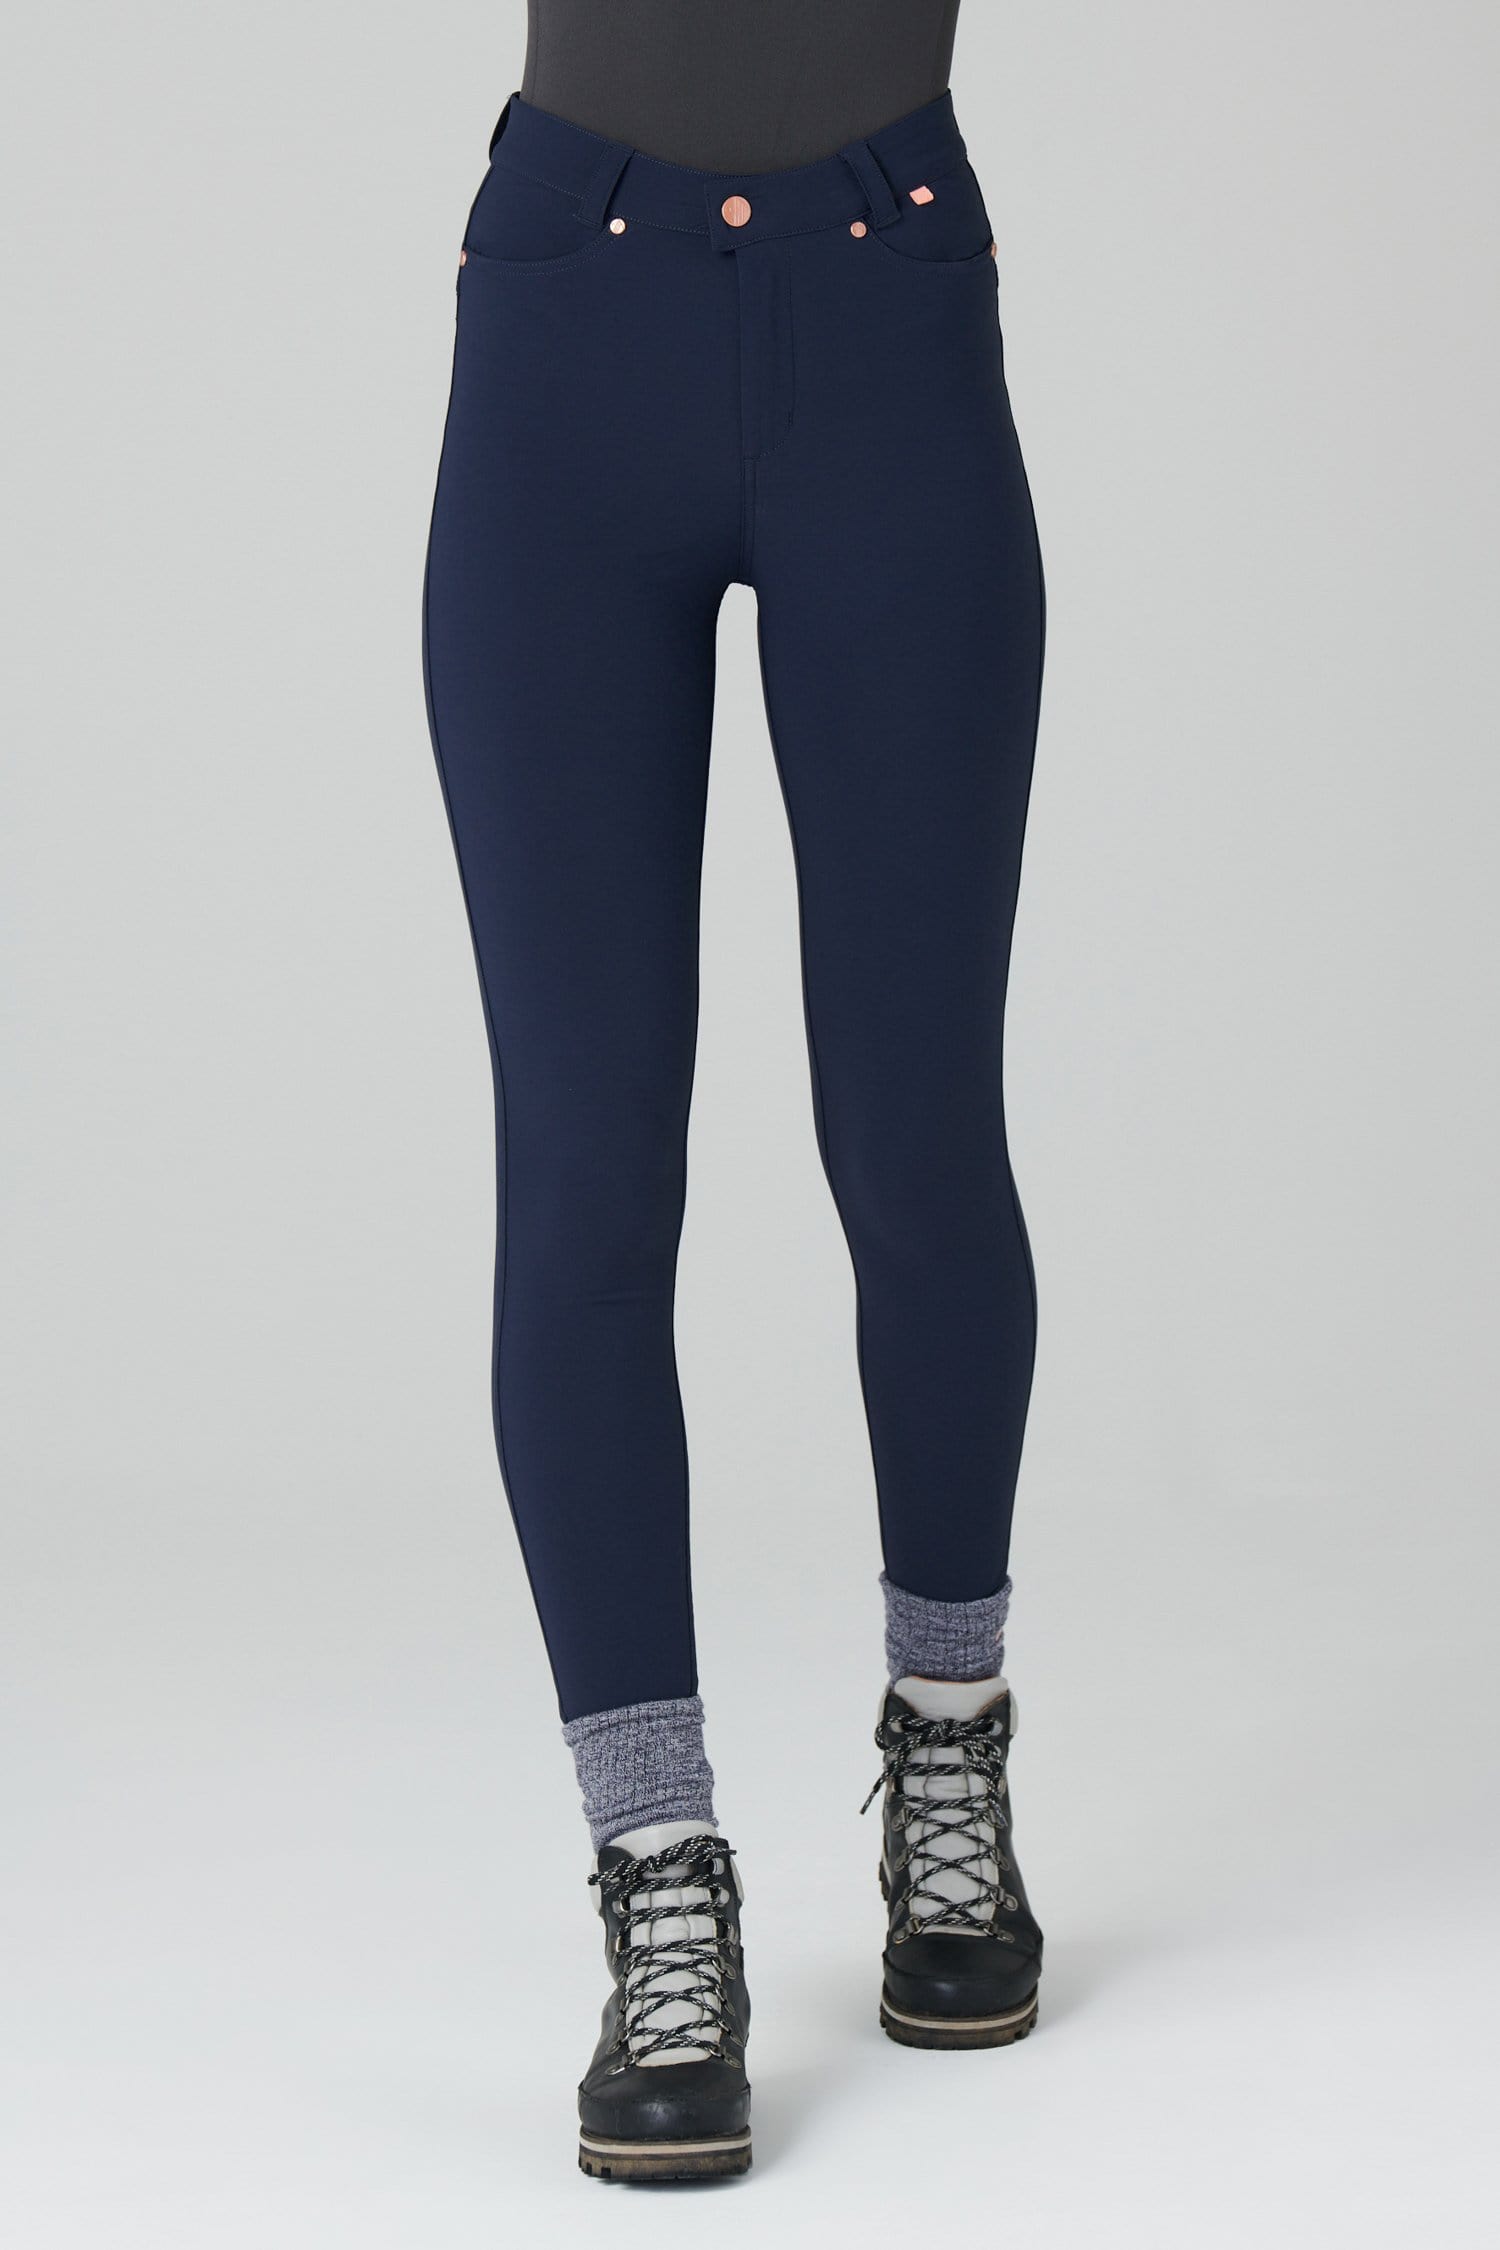 Max Stretch Skinny Outdoor Trousers - Deep Navy - 24p / Uk6 - Womens - Acai Outdoorwear